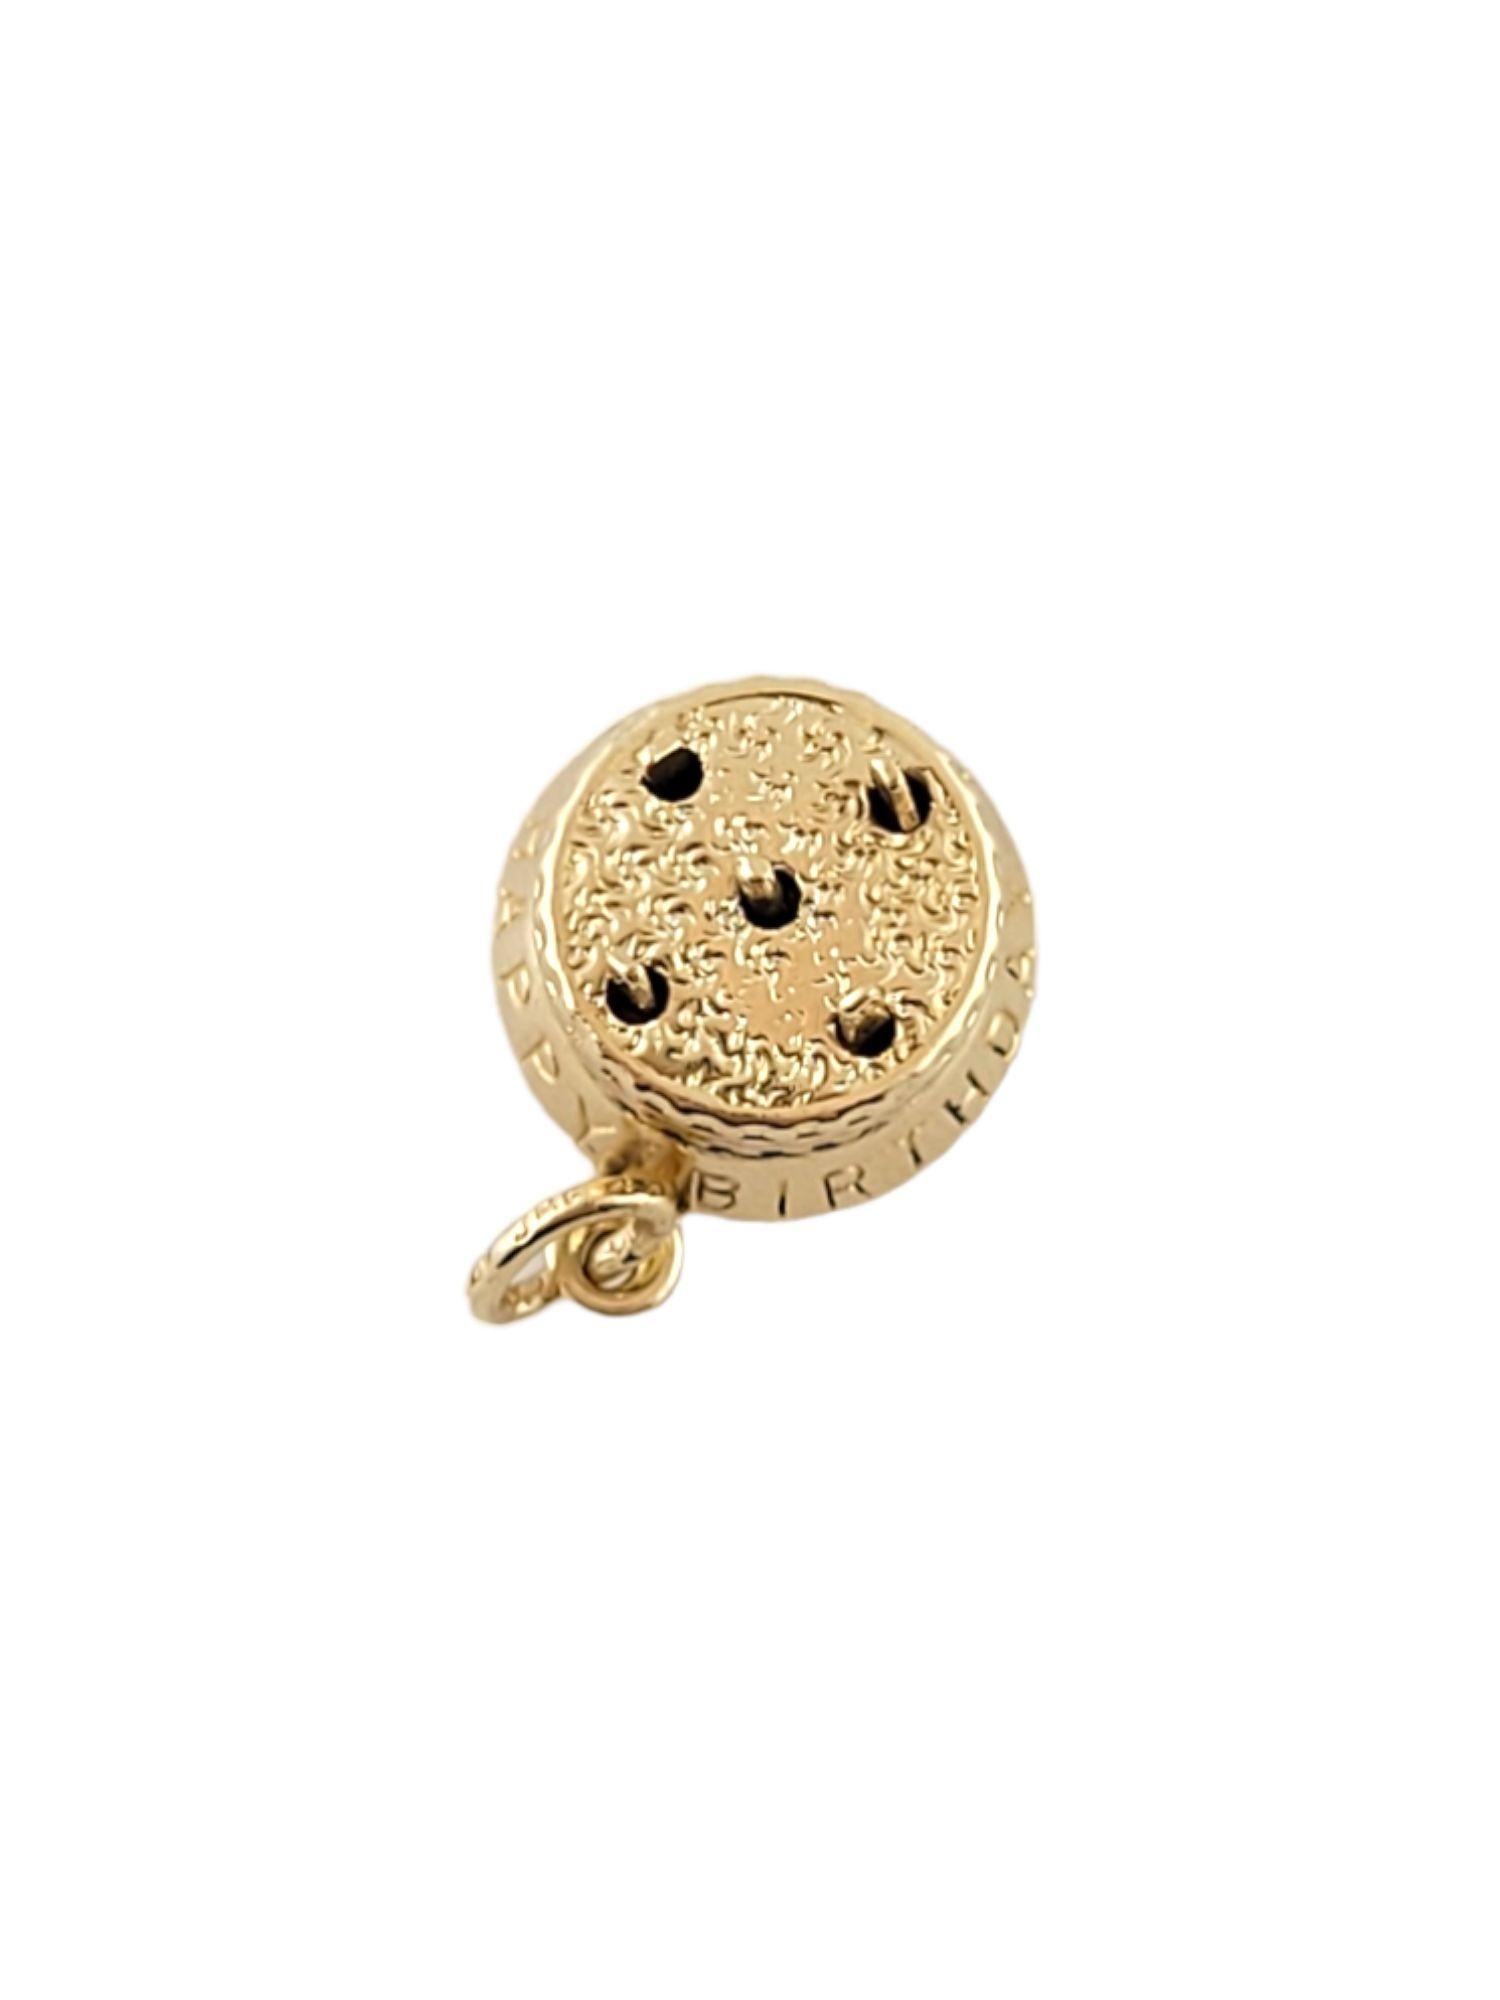 Vintage 14K Yellow Gold Happy Birthday Charm

This adorable birthday cake charm has interactie candles that can pop up and has 